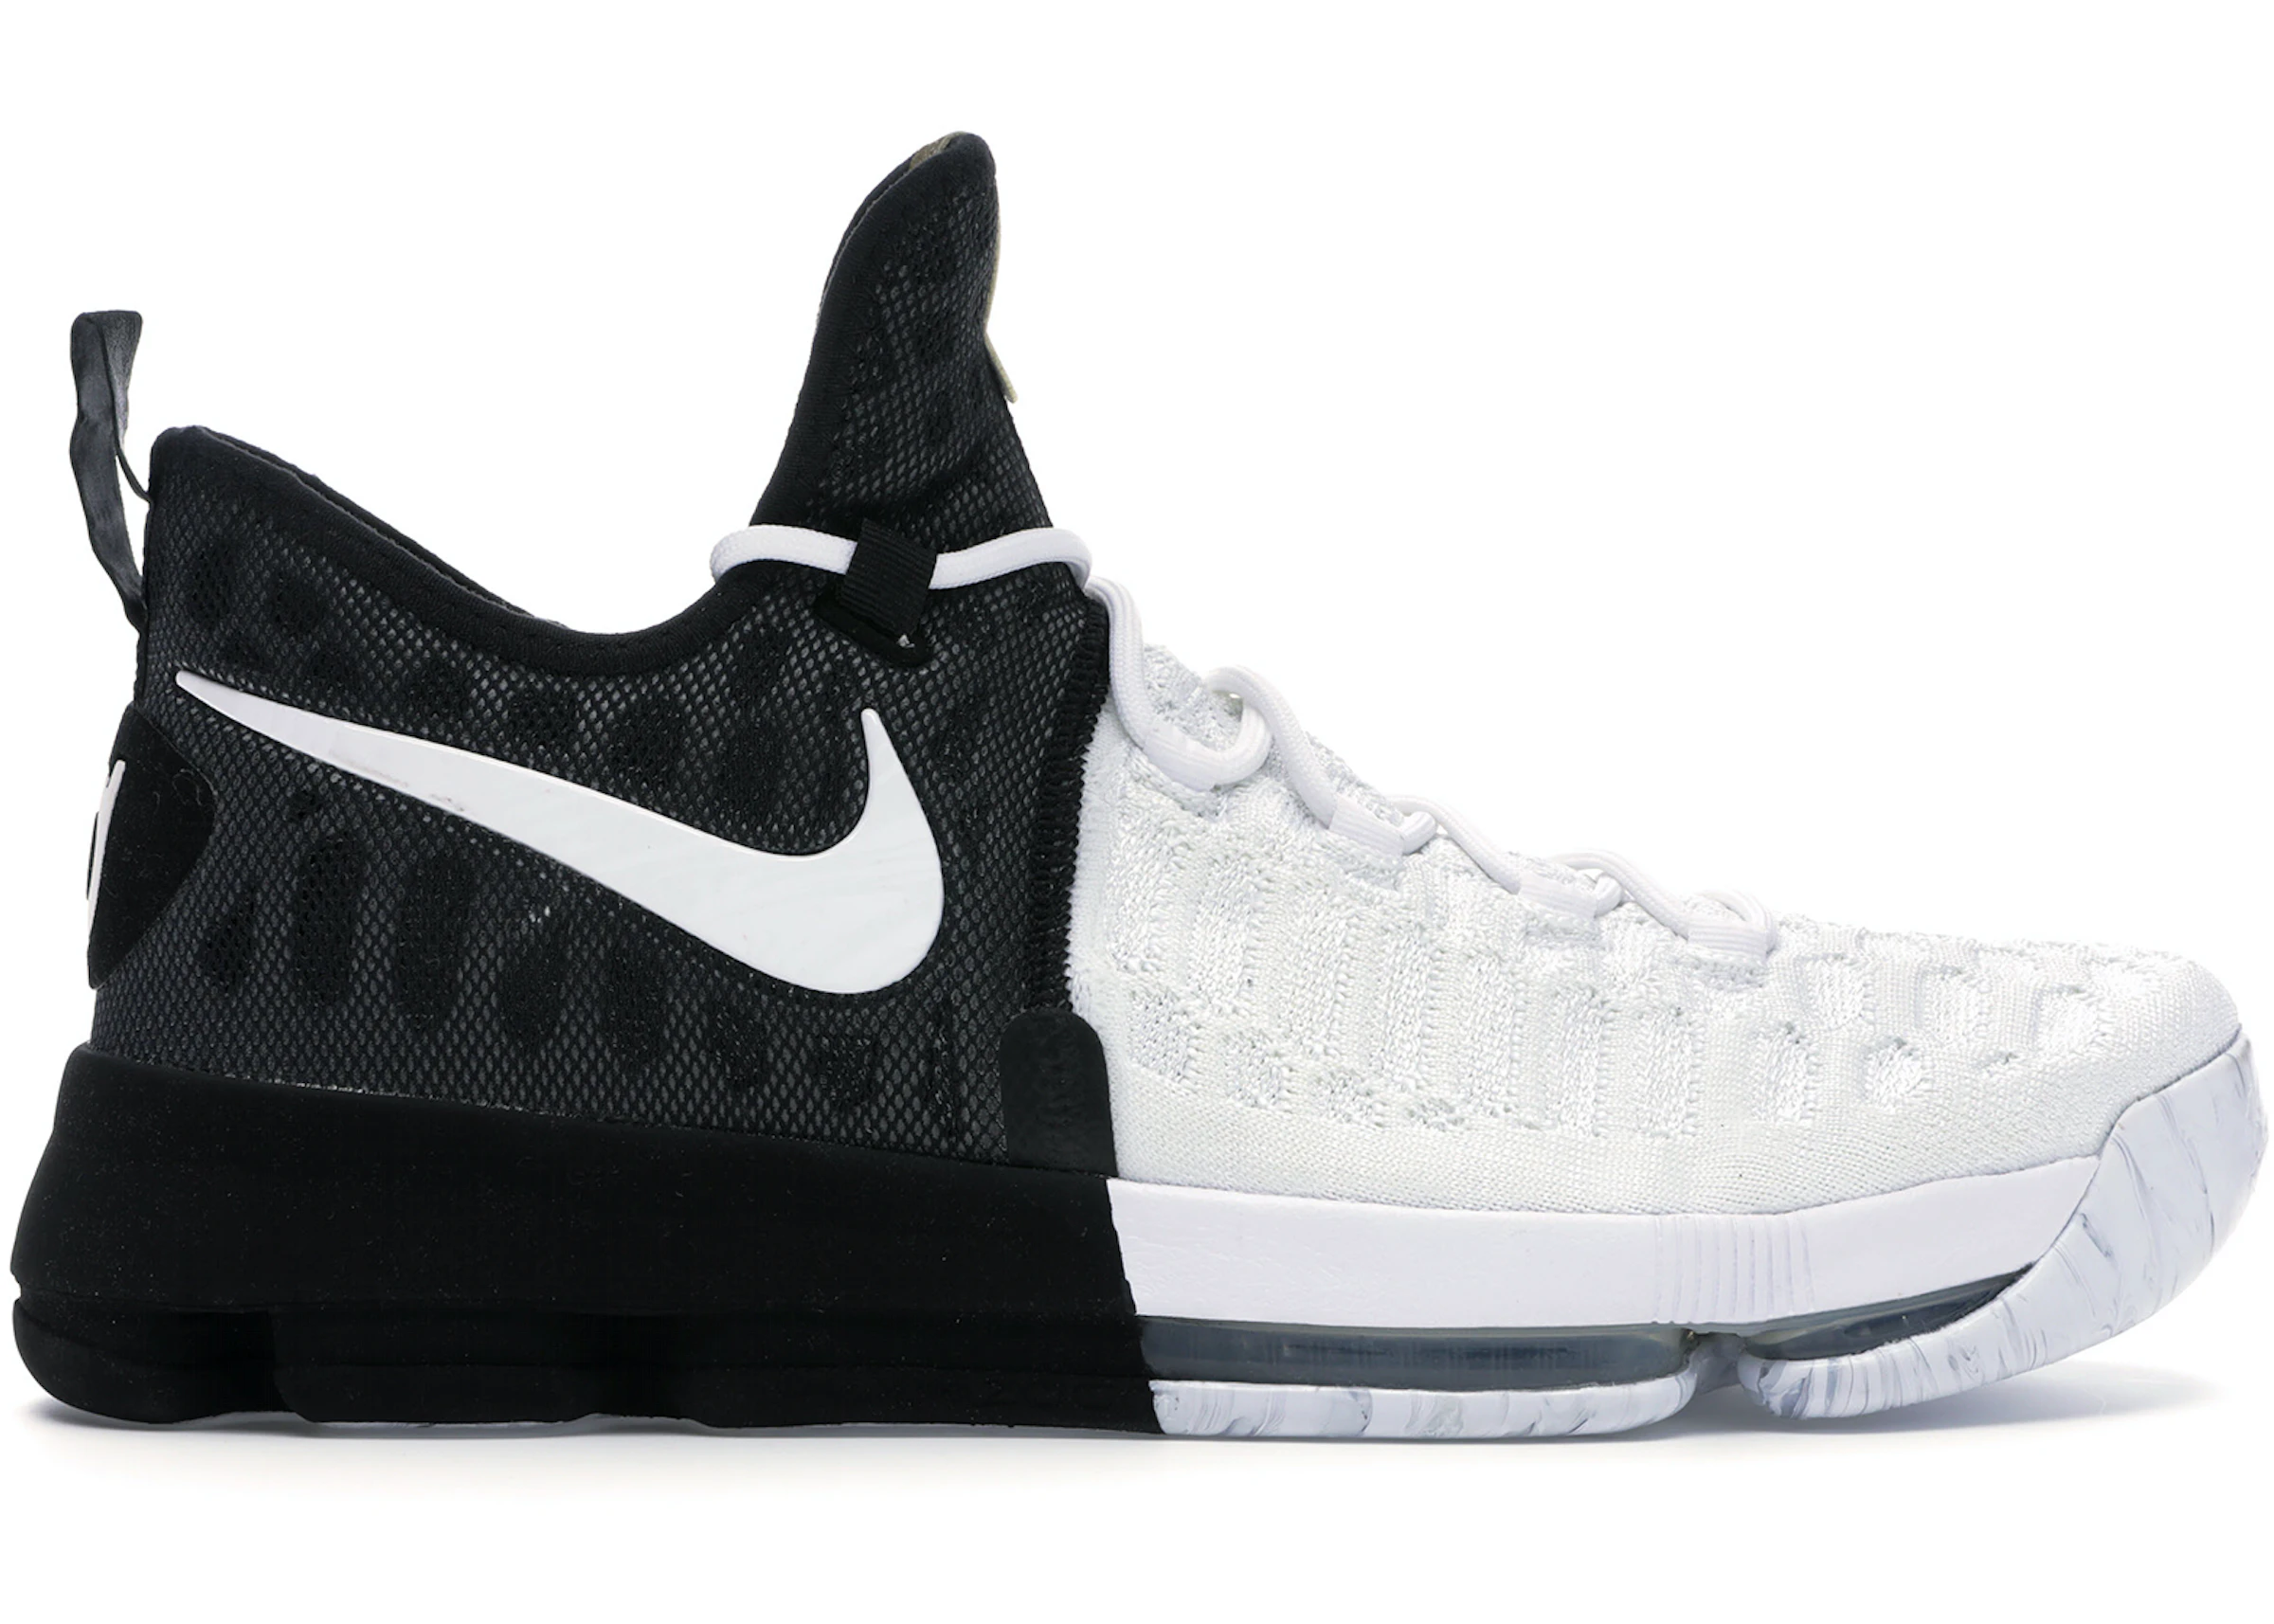 Buy Nike KD 9 Shoes & New Sneakers - StockX